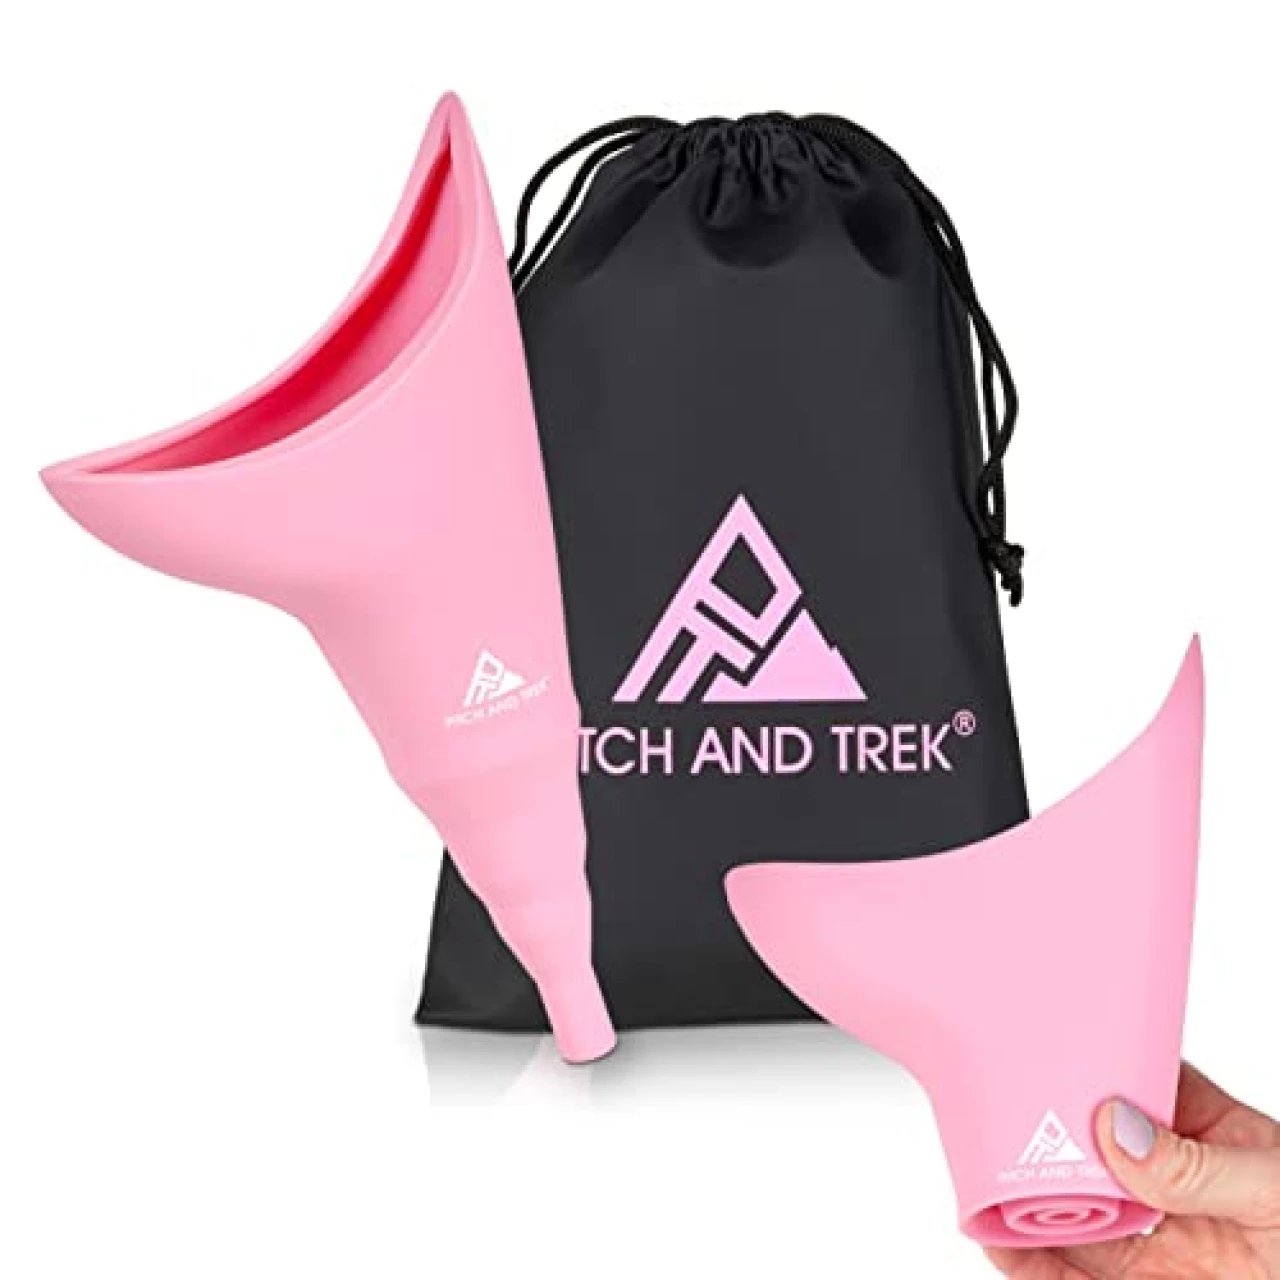 Pitch and Trek Female Urination Device, Silicone Standing Pee Funnel w/Discreet Carry Bag, for Travel, Road Trip, Festival, Camping &amp; Hiking Gear Essentials for Women, Pink